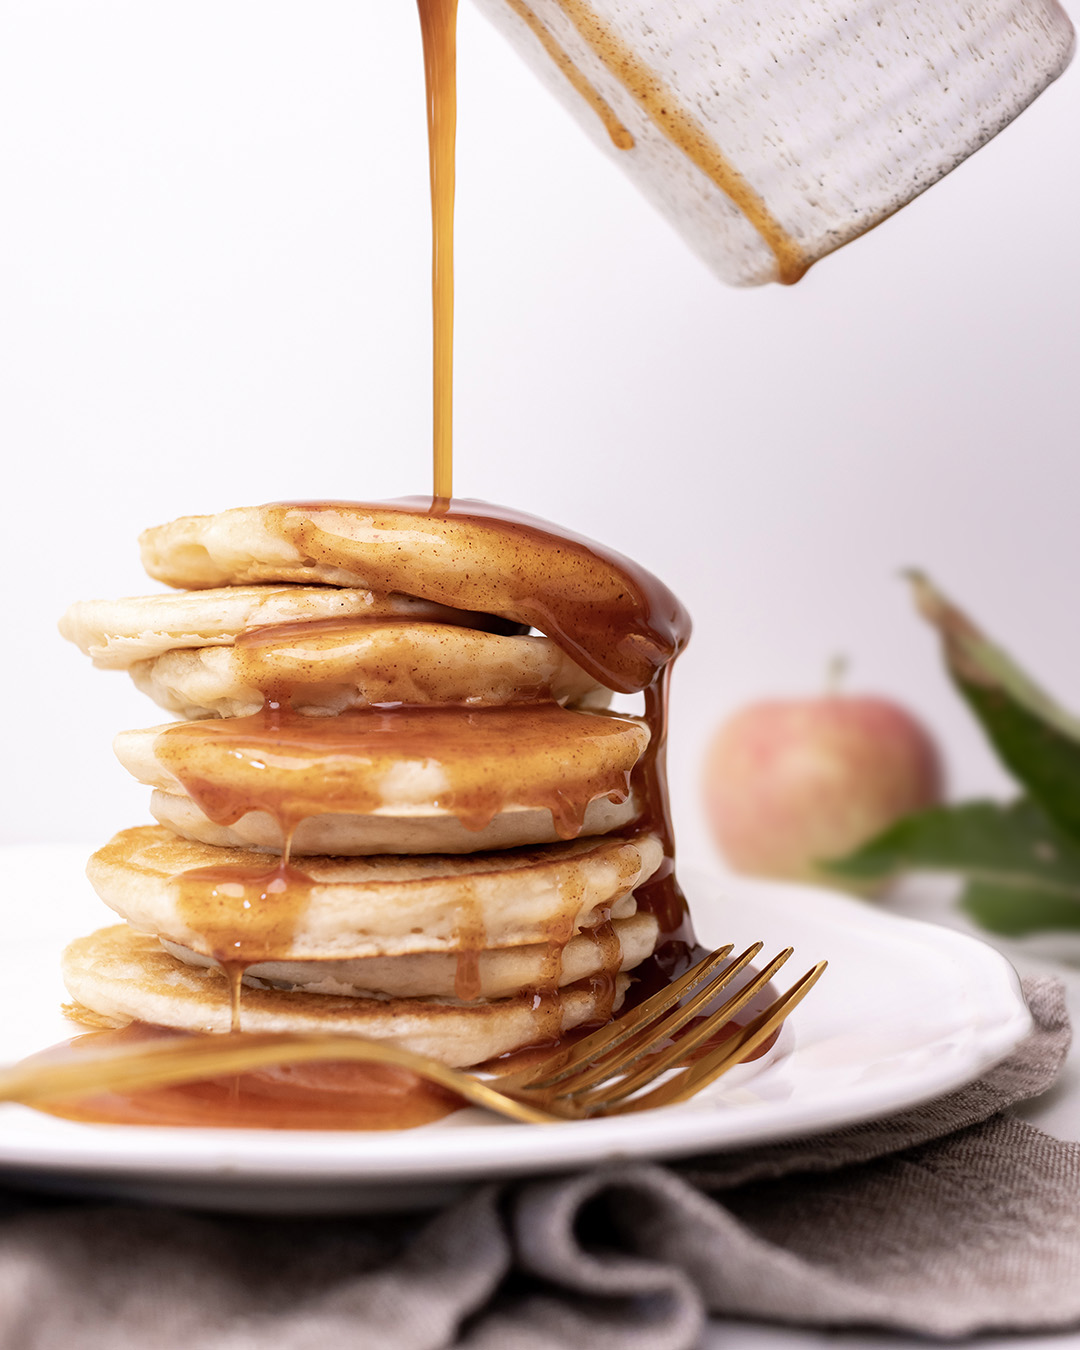 Pouring syrup over a big stack of pancakes.